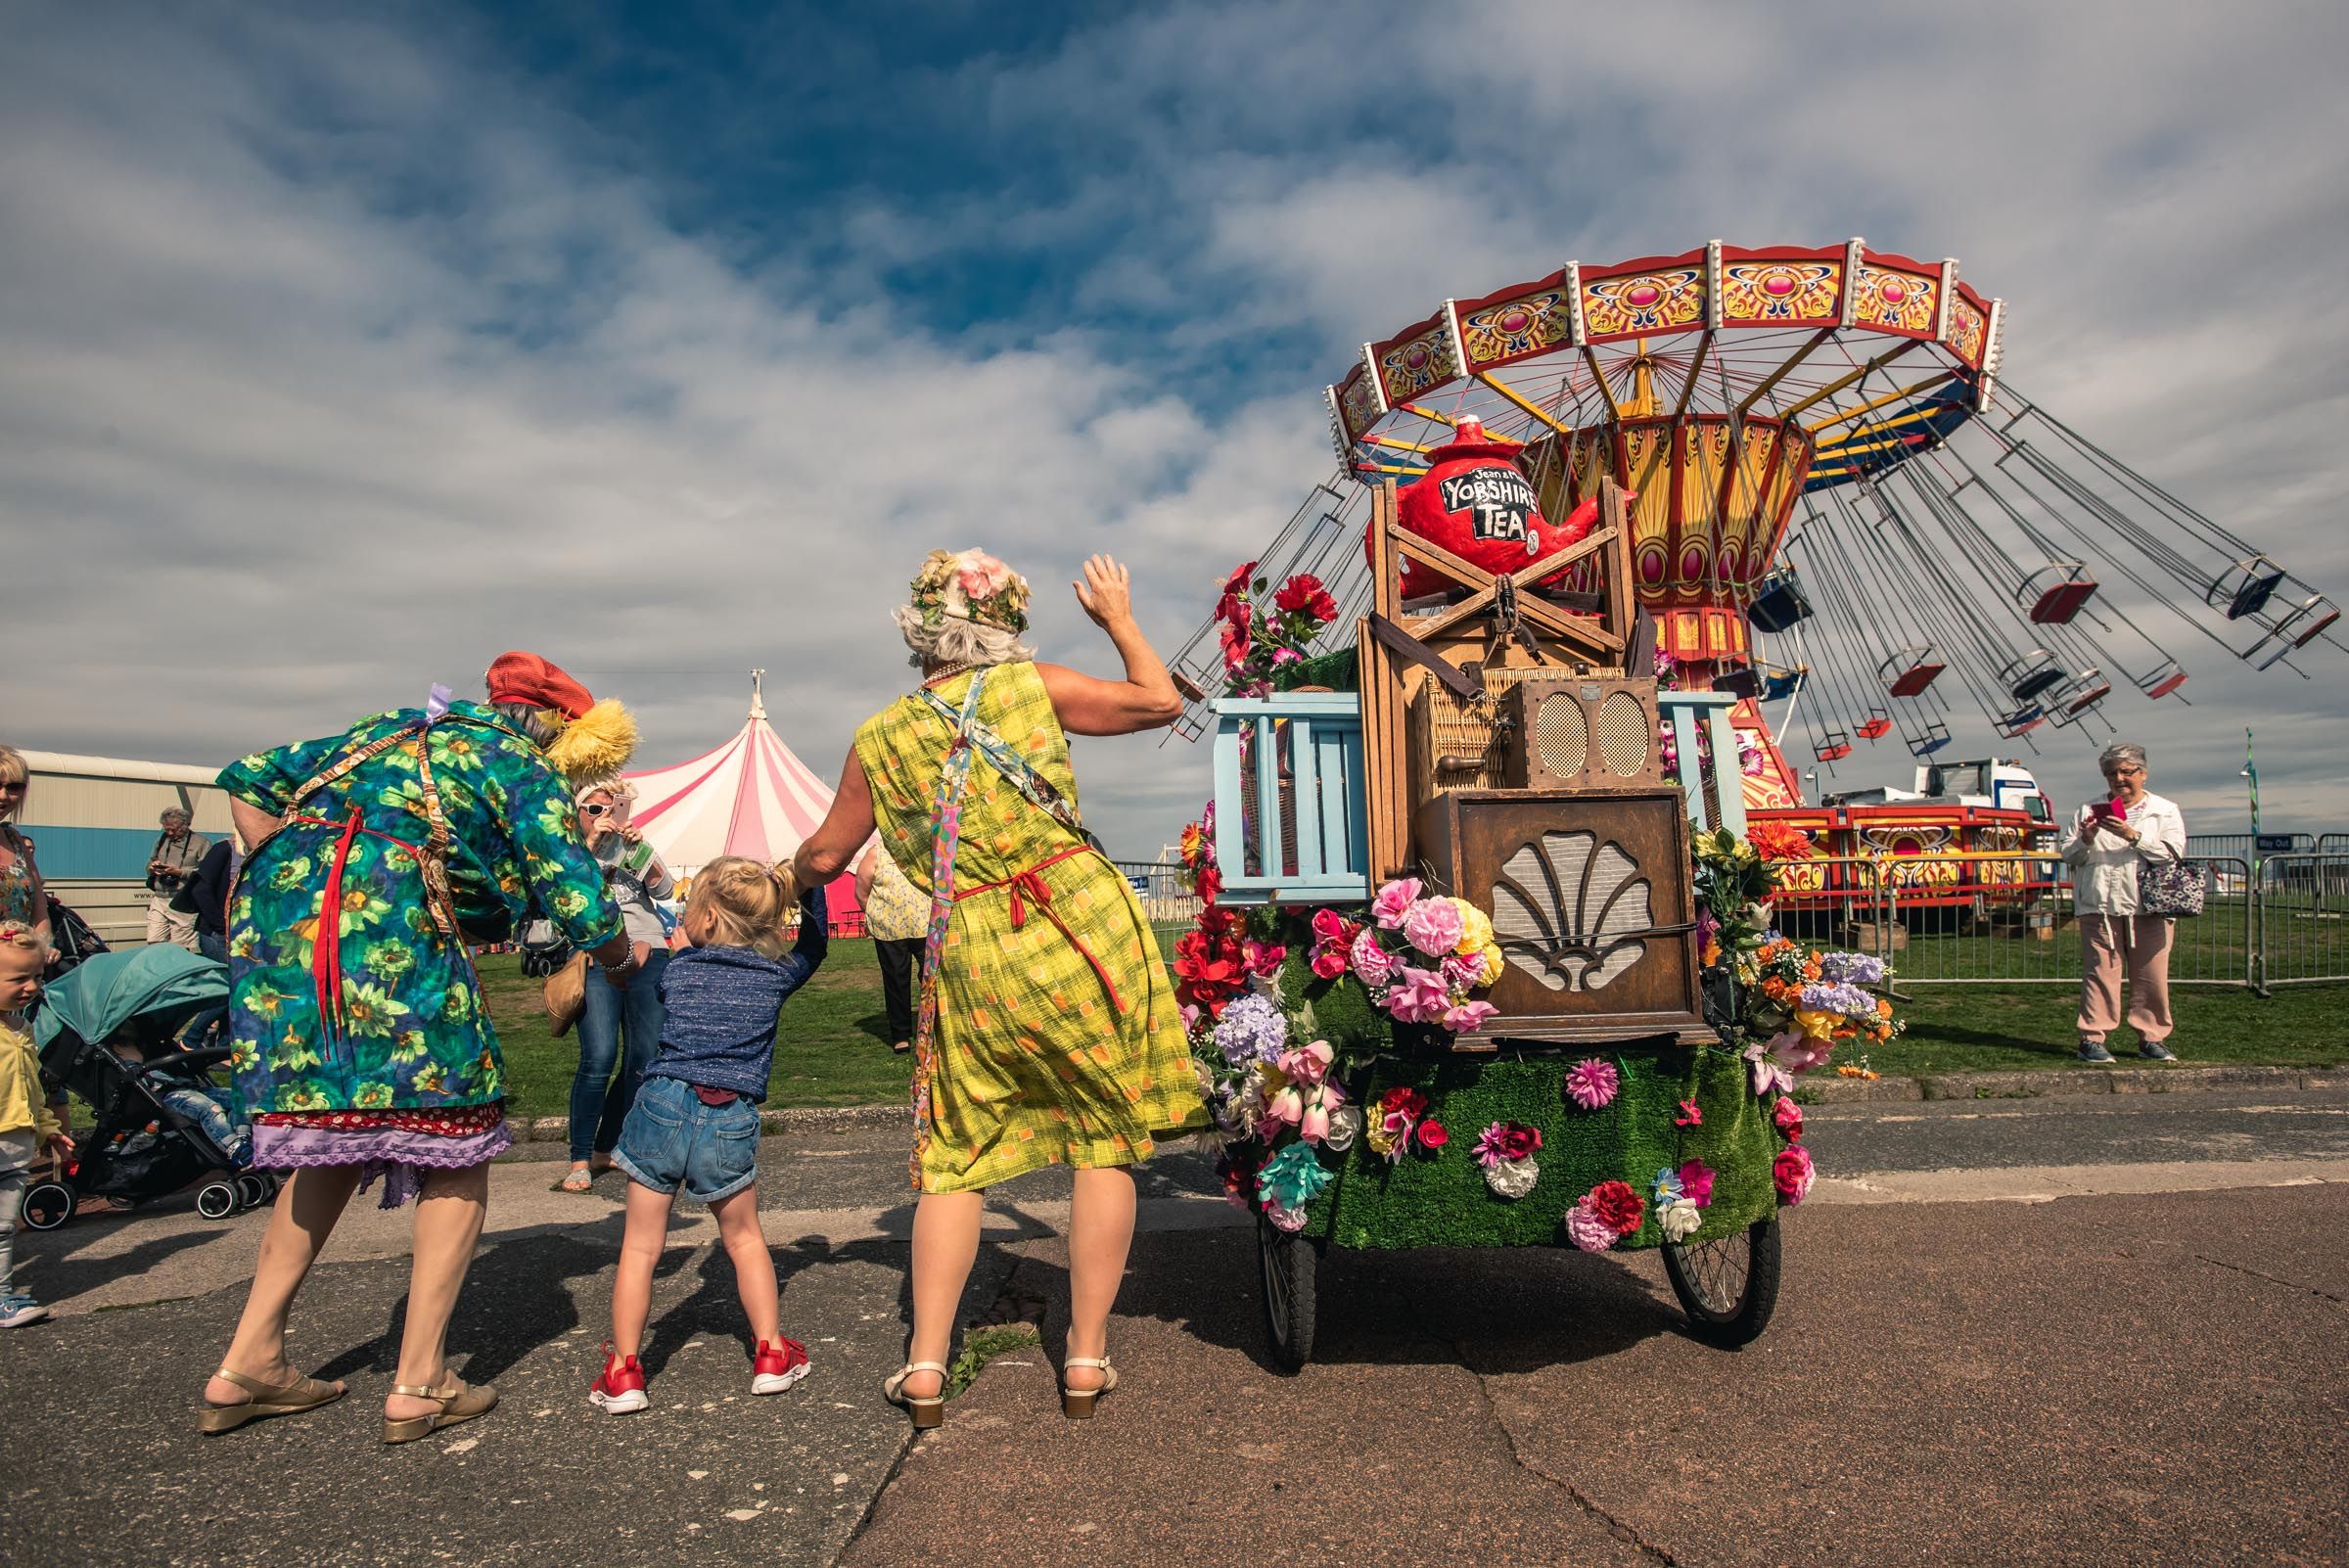 Vintage by the Sea 2018